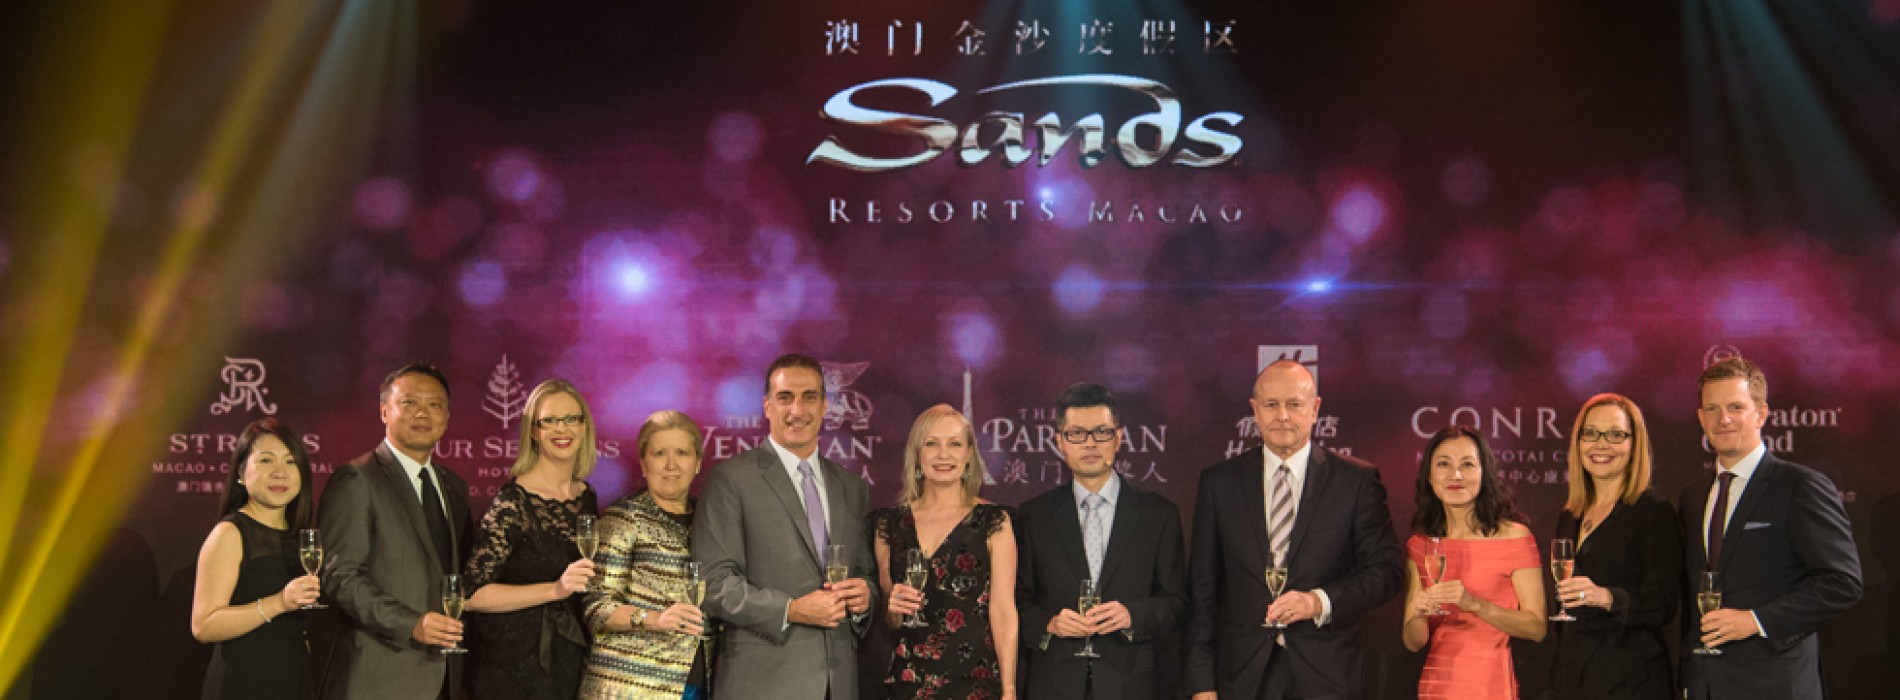 Sands Resorts Macao hosts its First ‘The Ultimate Download – Asia’s Leading Meetings & Events Destination’ Tour for International Meeting Convention & Exhibition Professionals